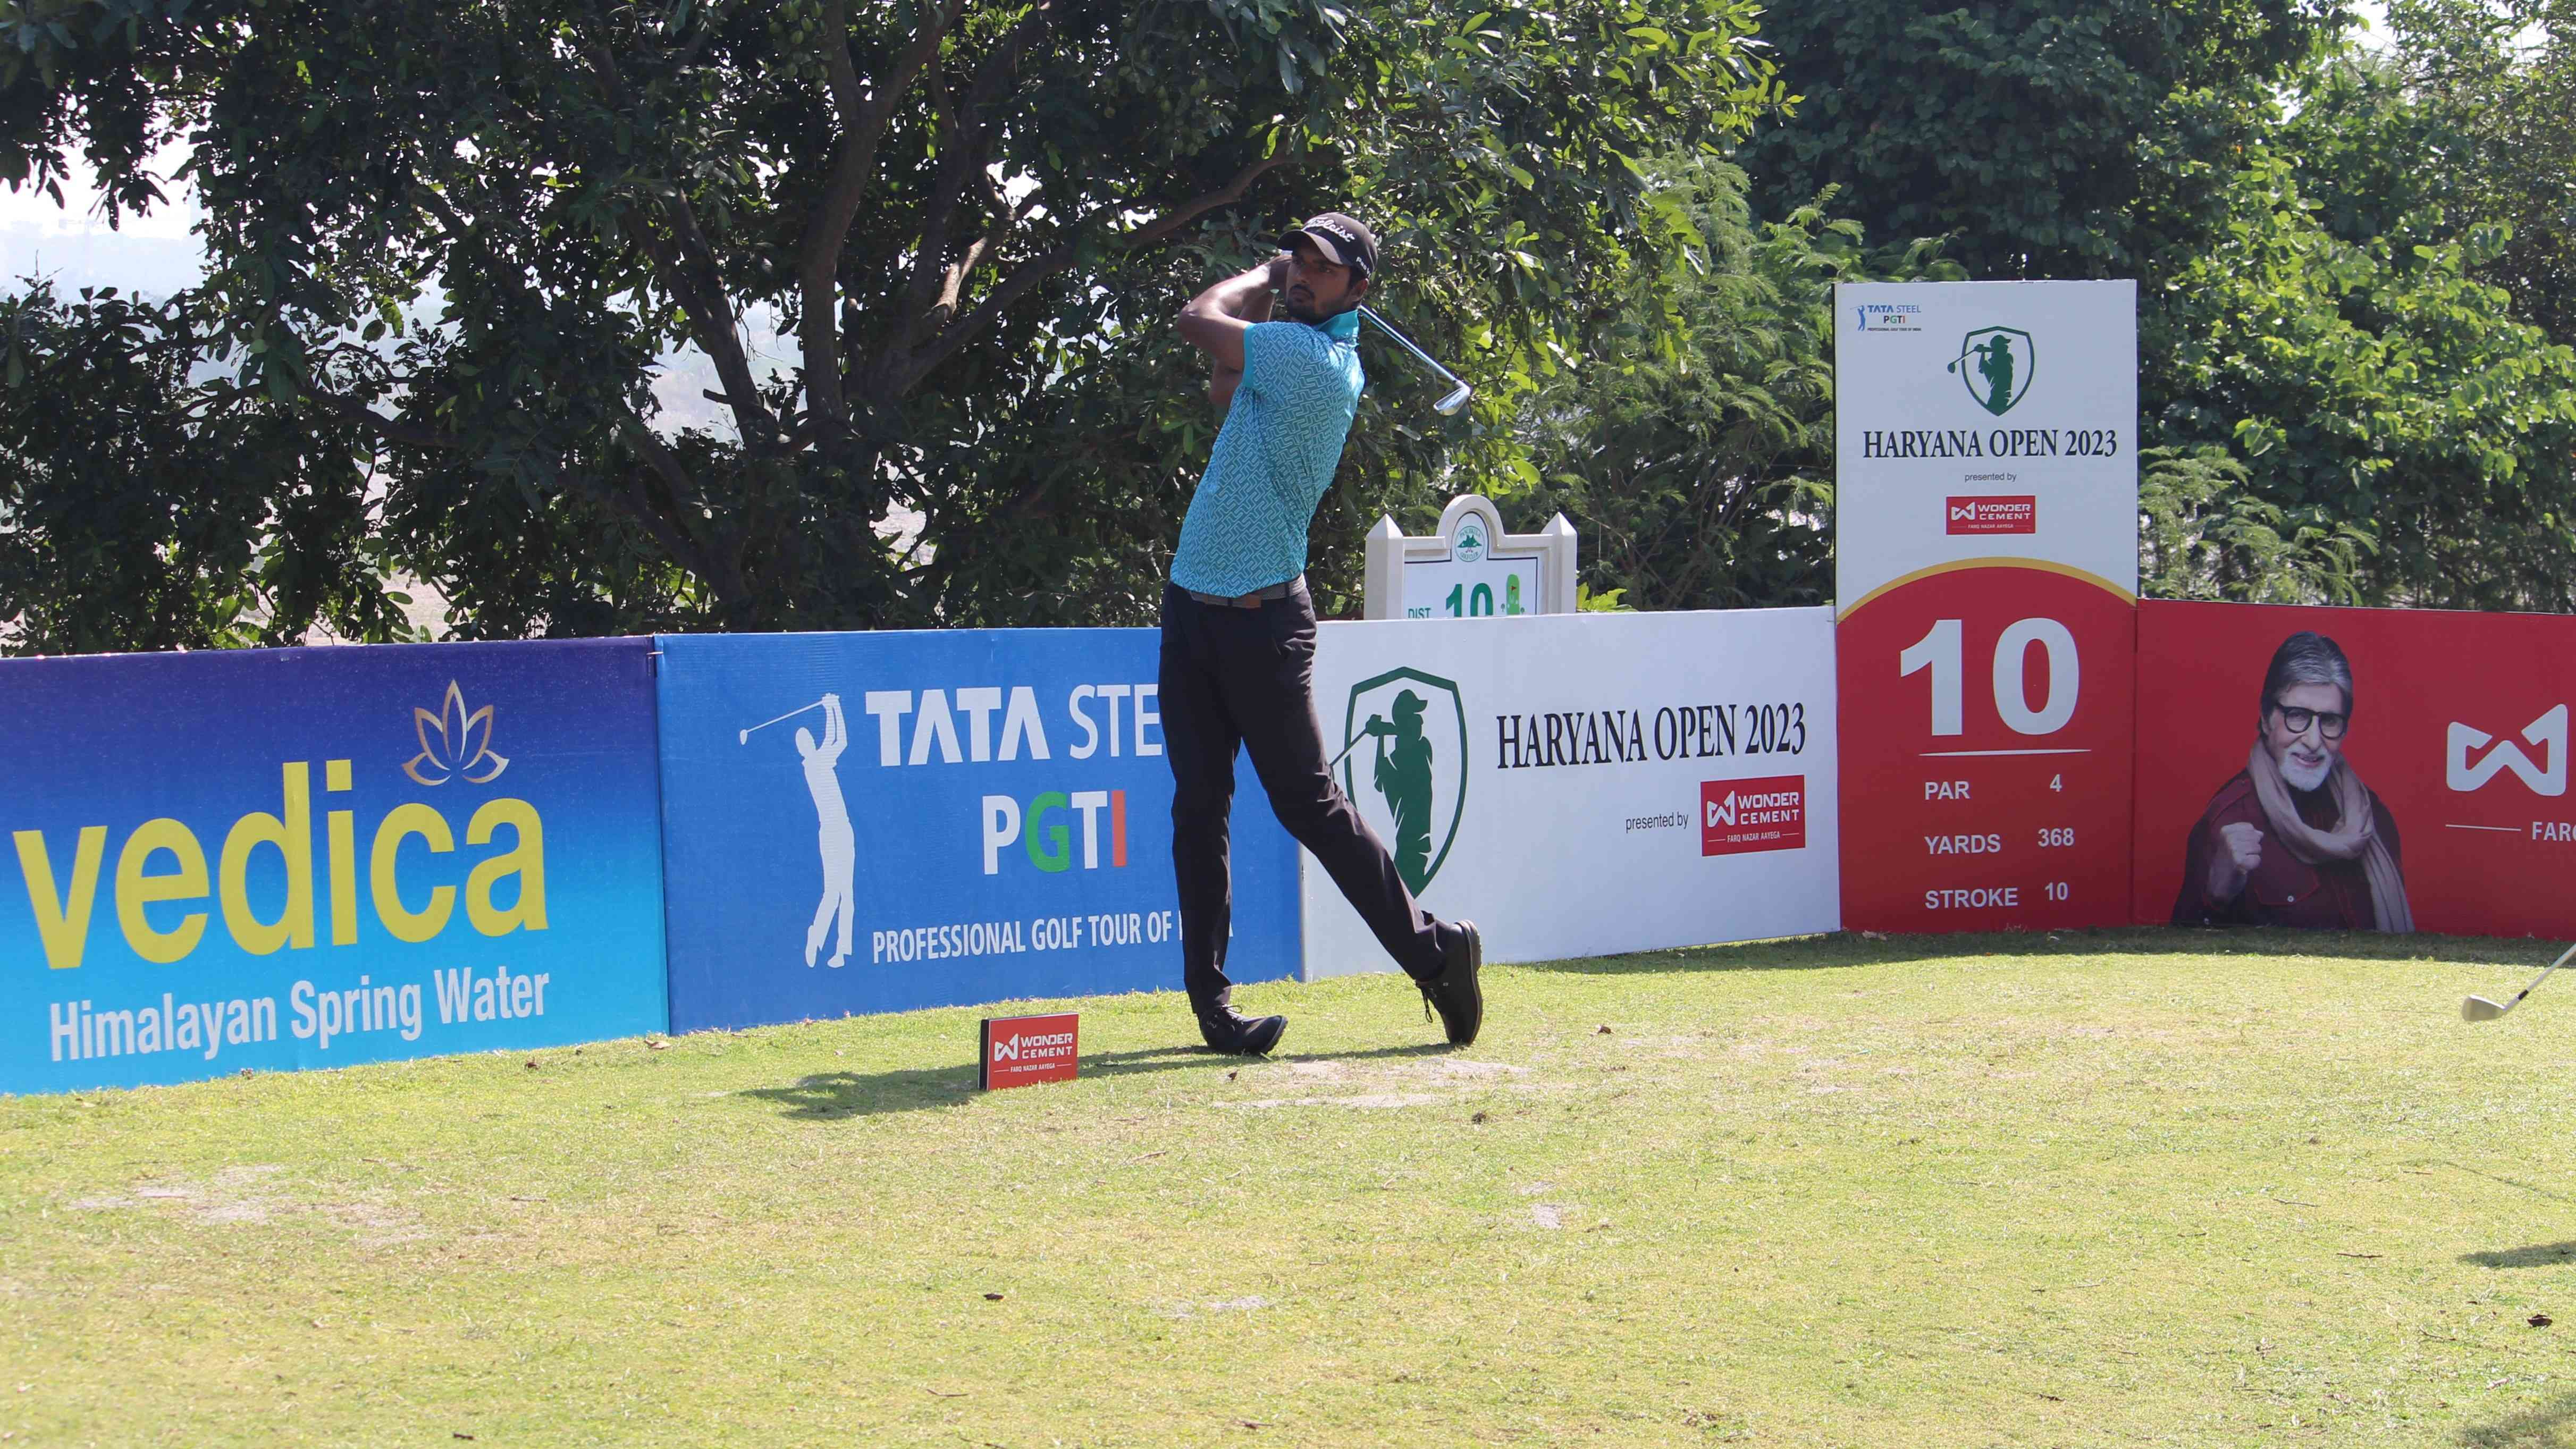 Professional Golf Tour of India - Sunhit Bishnoi's win at the India Cements  Pro Championship 2023 propelled him into the top 10 of the TATA Steel PGTI  Rankings #pgtofindia #IndiaSwingsForGlory #IndiaCementsProCship23  #PGTIChennai23 #